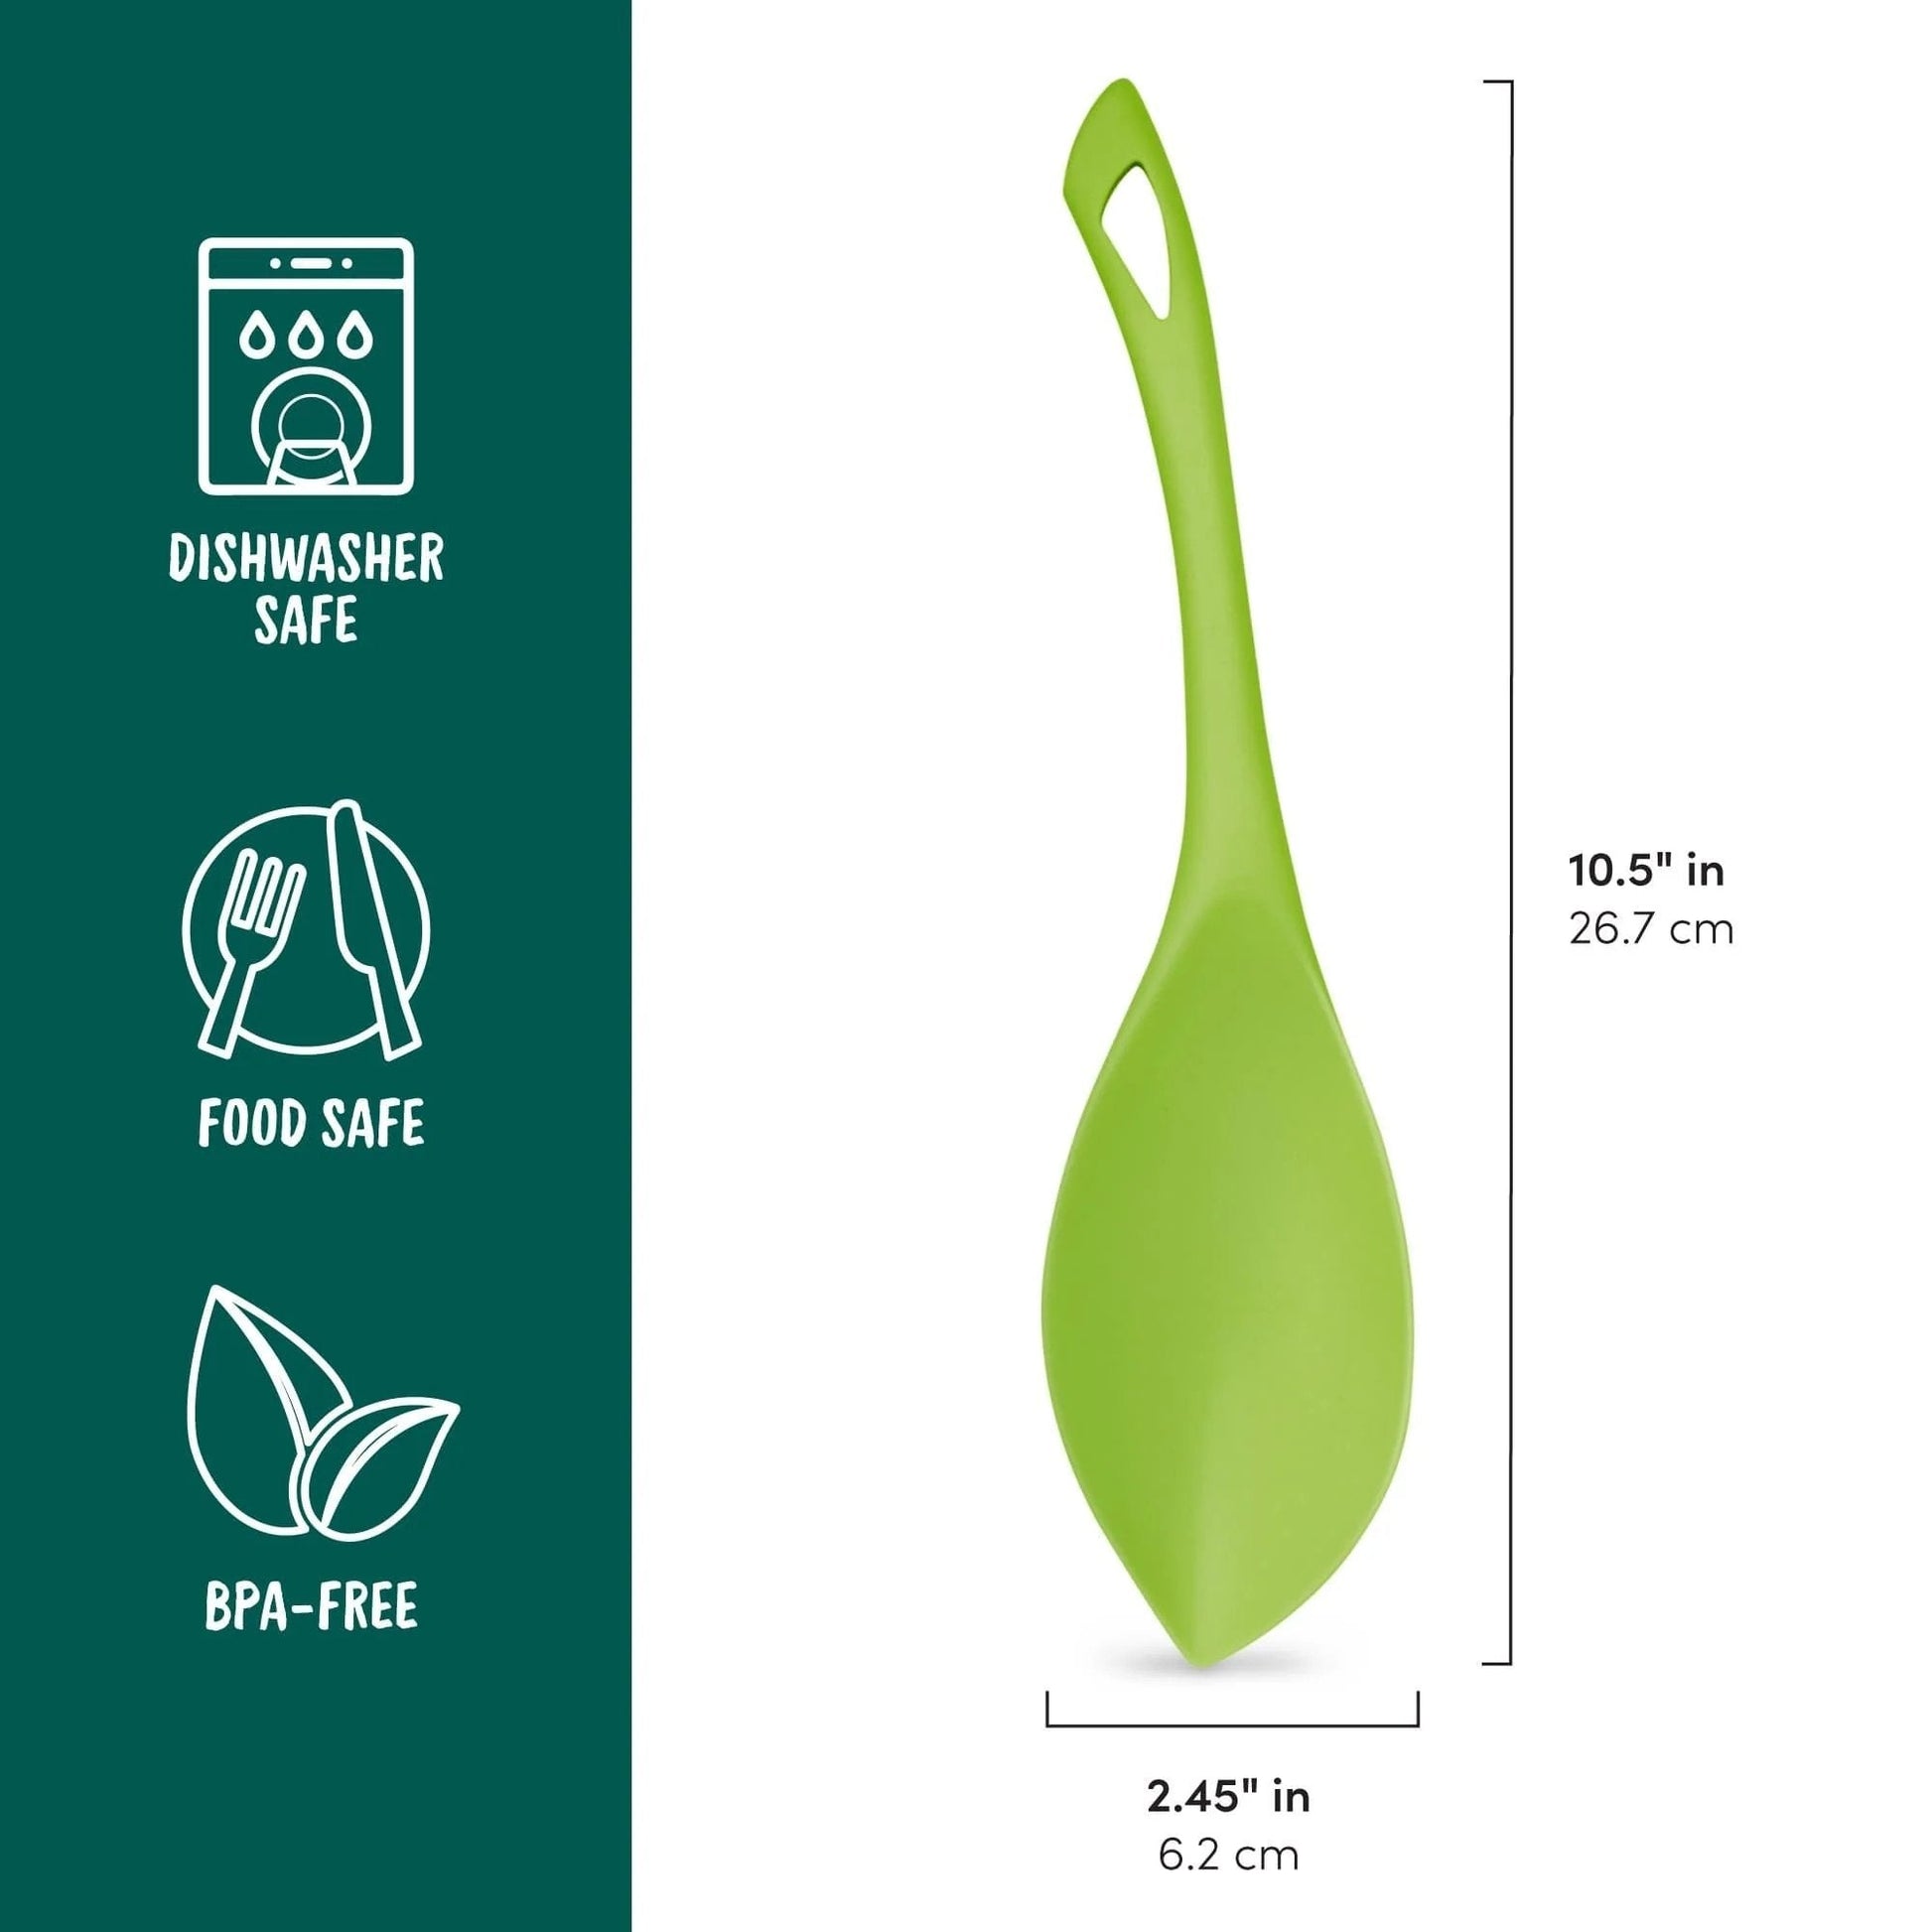 Sprout Leaf Spoon + Spatula Cooking Utensil